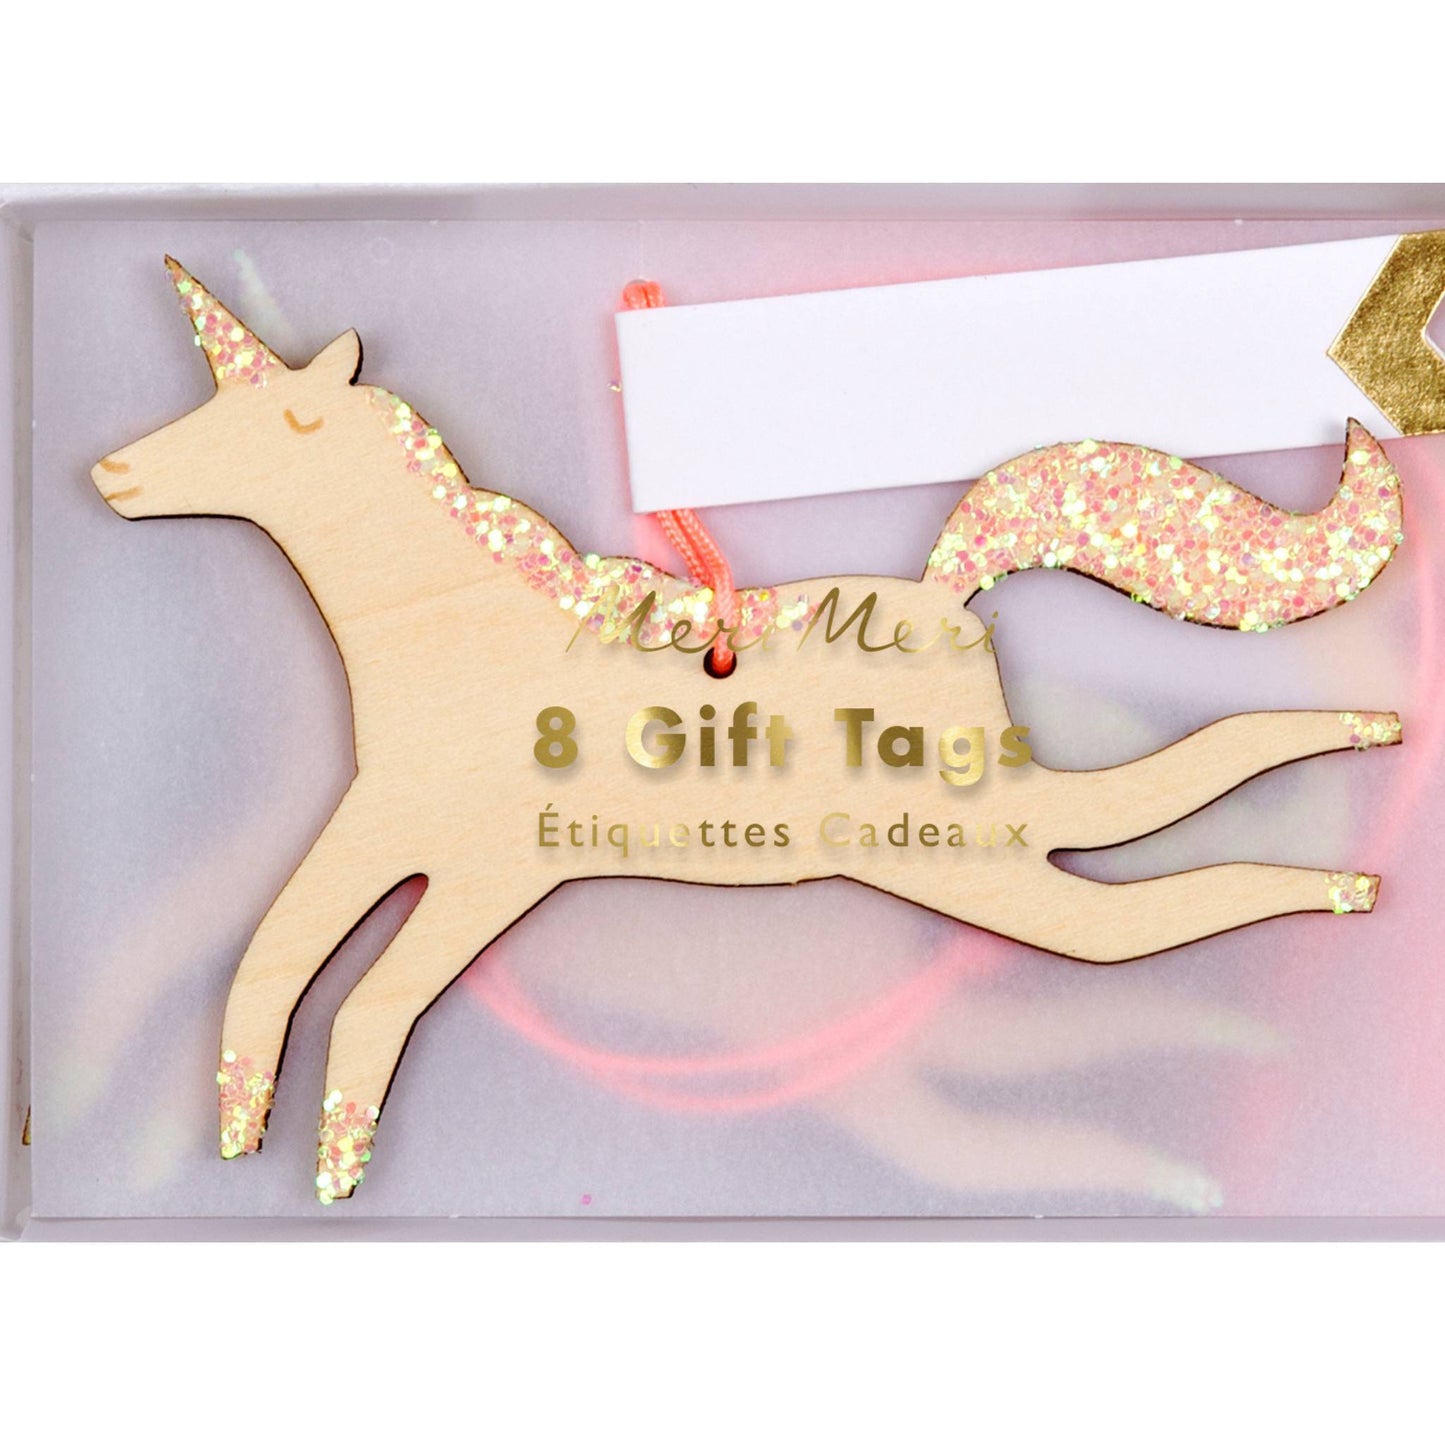 Whimsical Wooden Unicorn Gift Tags by Meri Meri With Glitter & Paper Tag. 8 pack